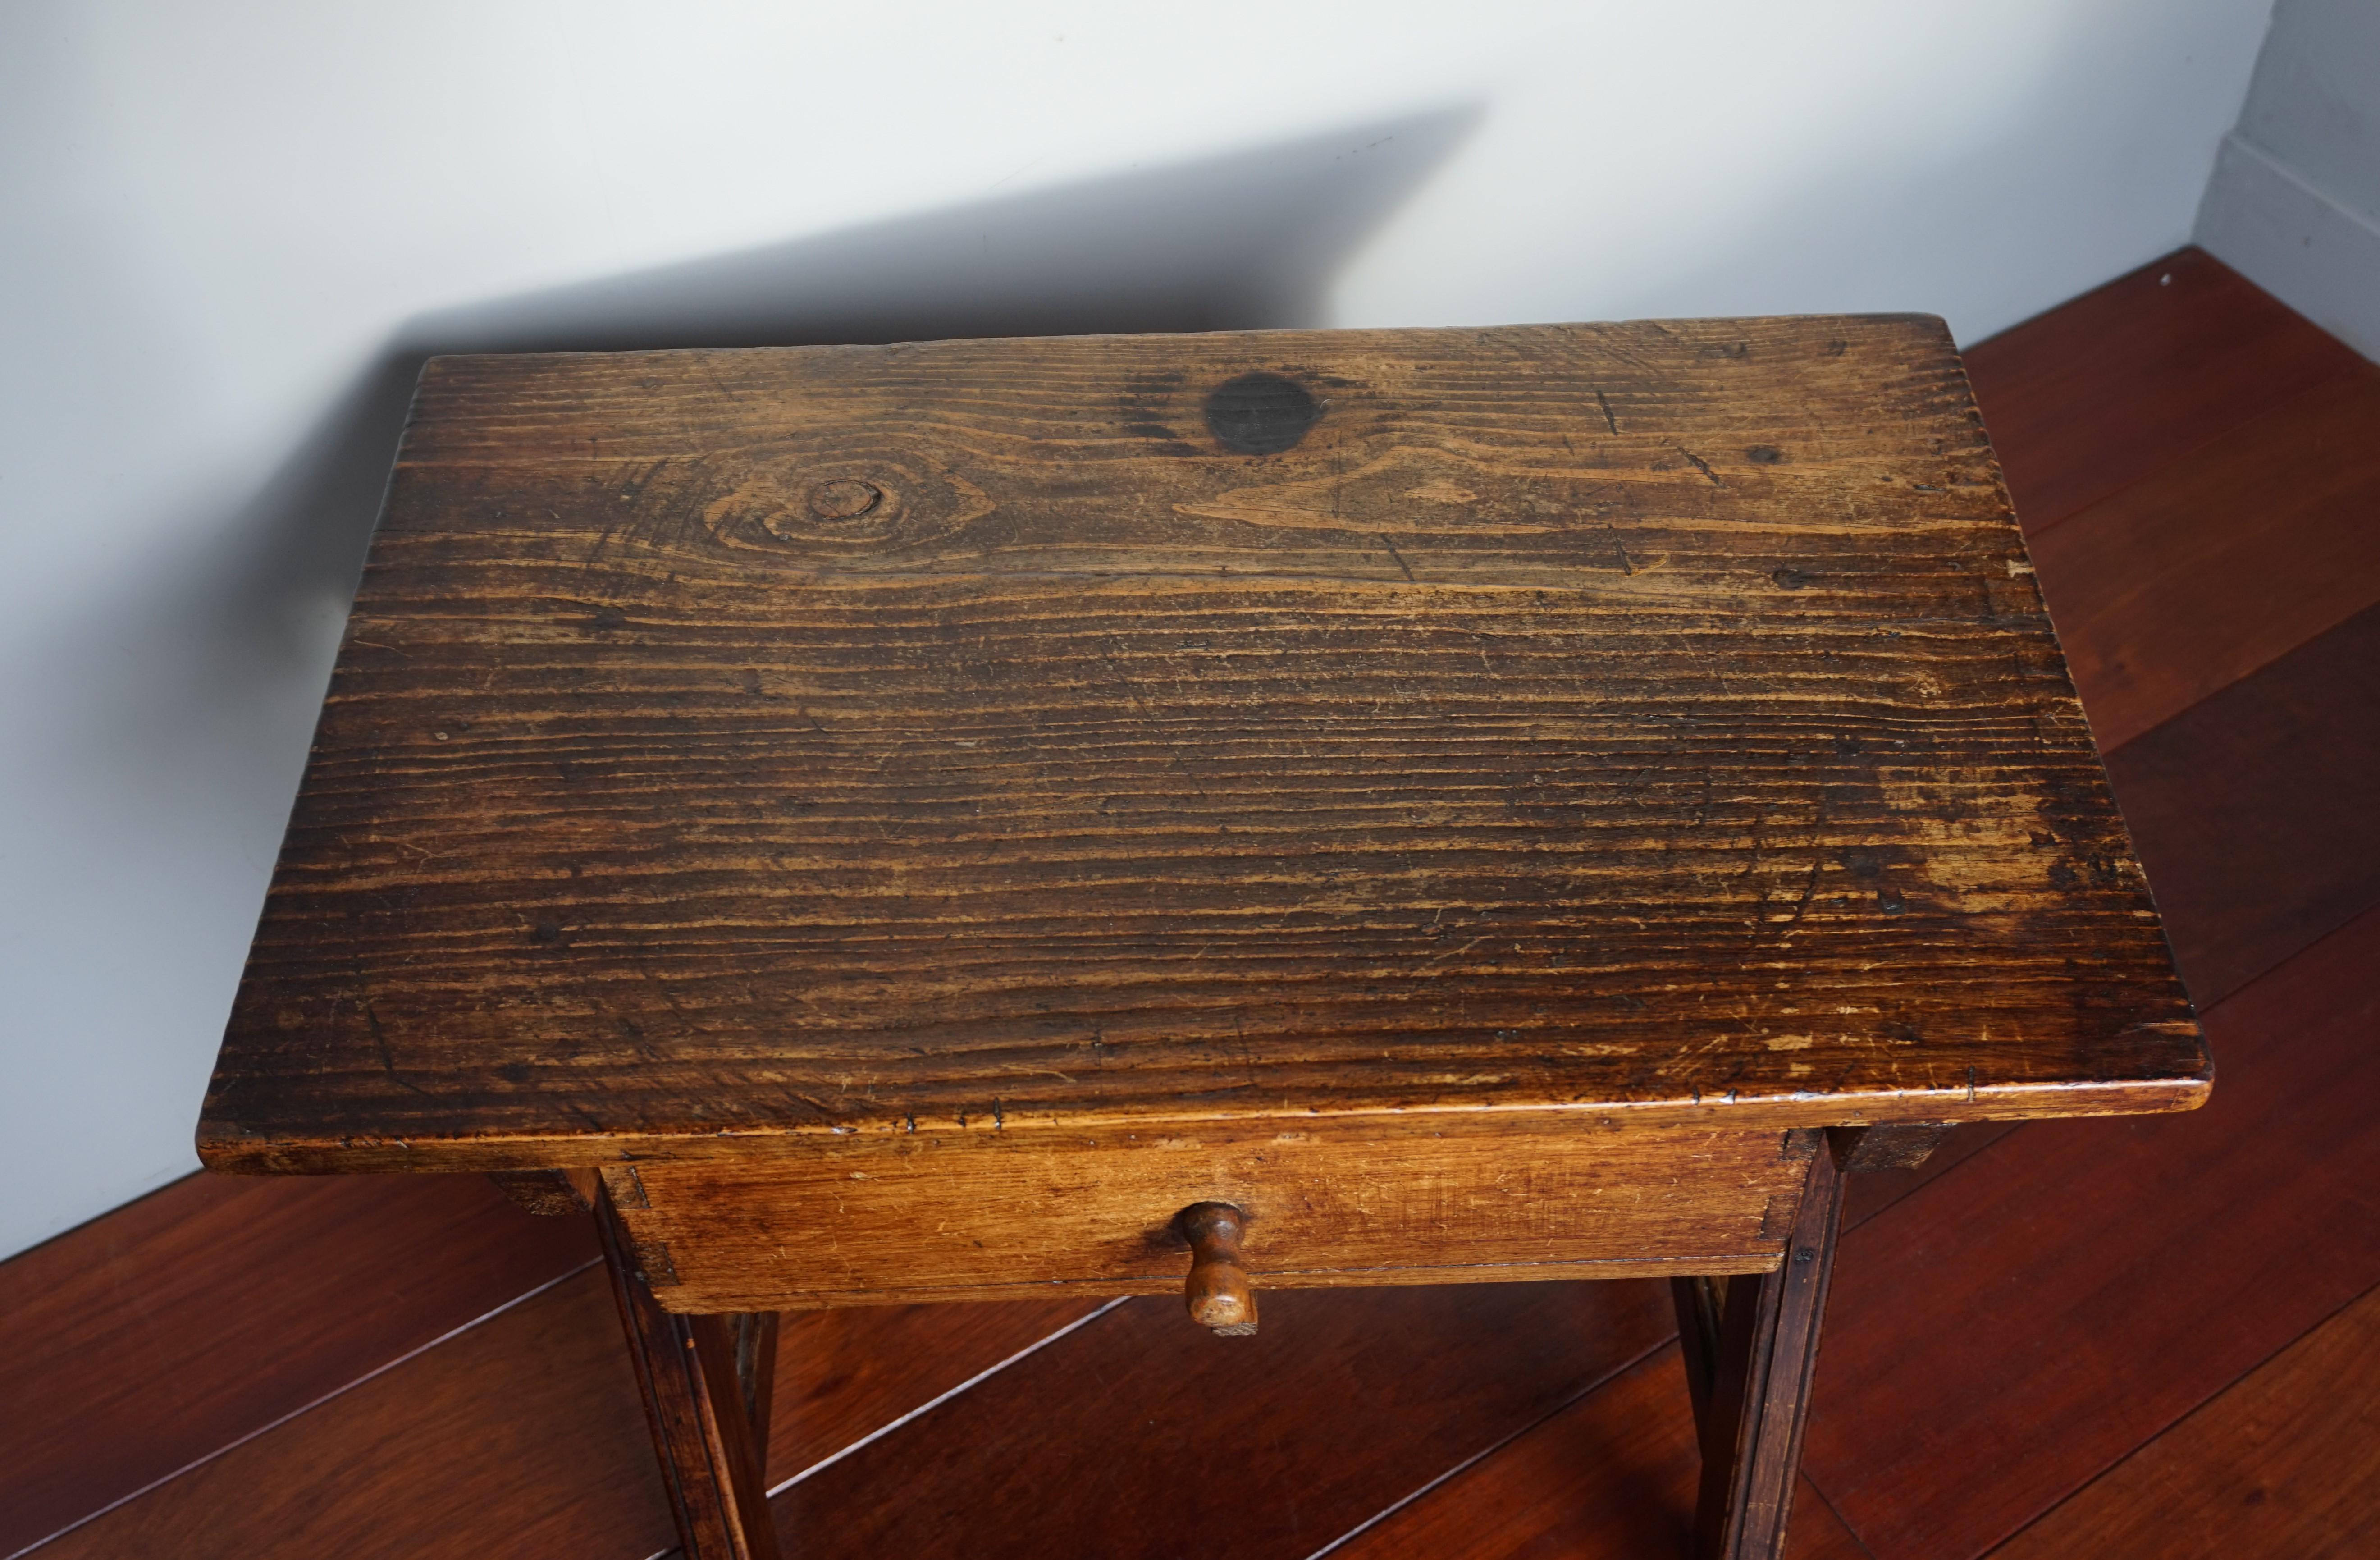 Hand-Crafted Antique and Rustic Early 1800s Wooden Spanish Countryside Pay Table with Drawer